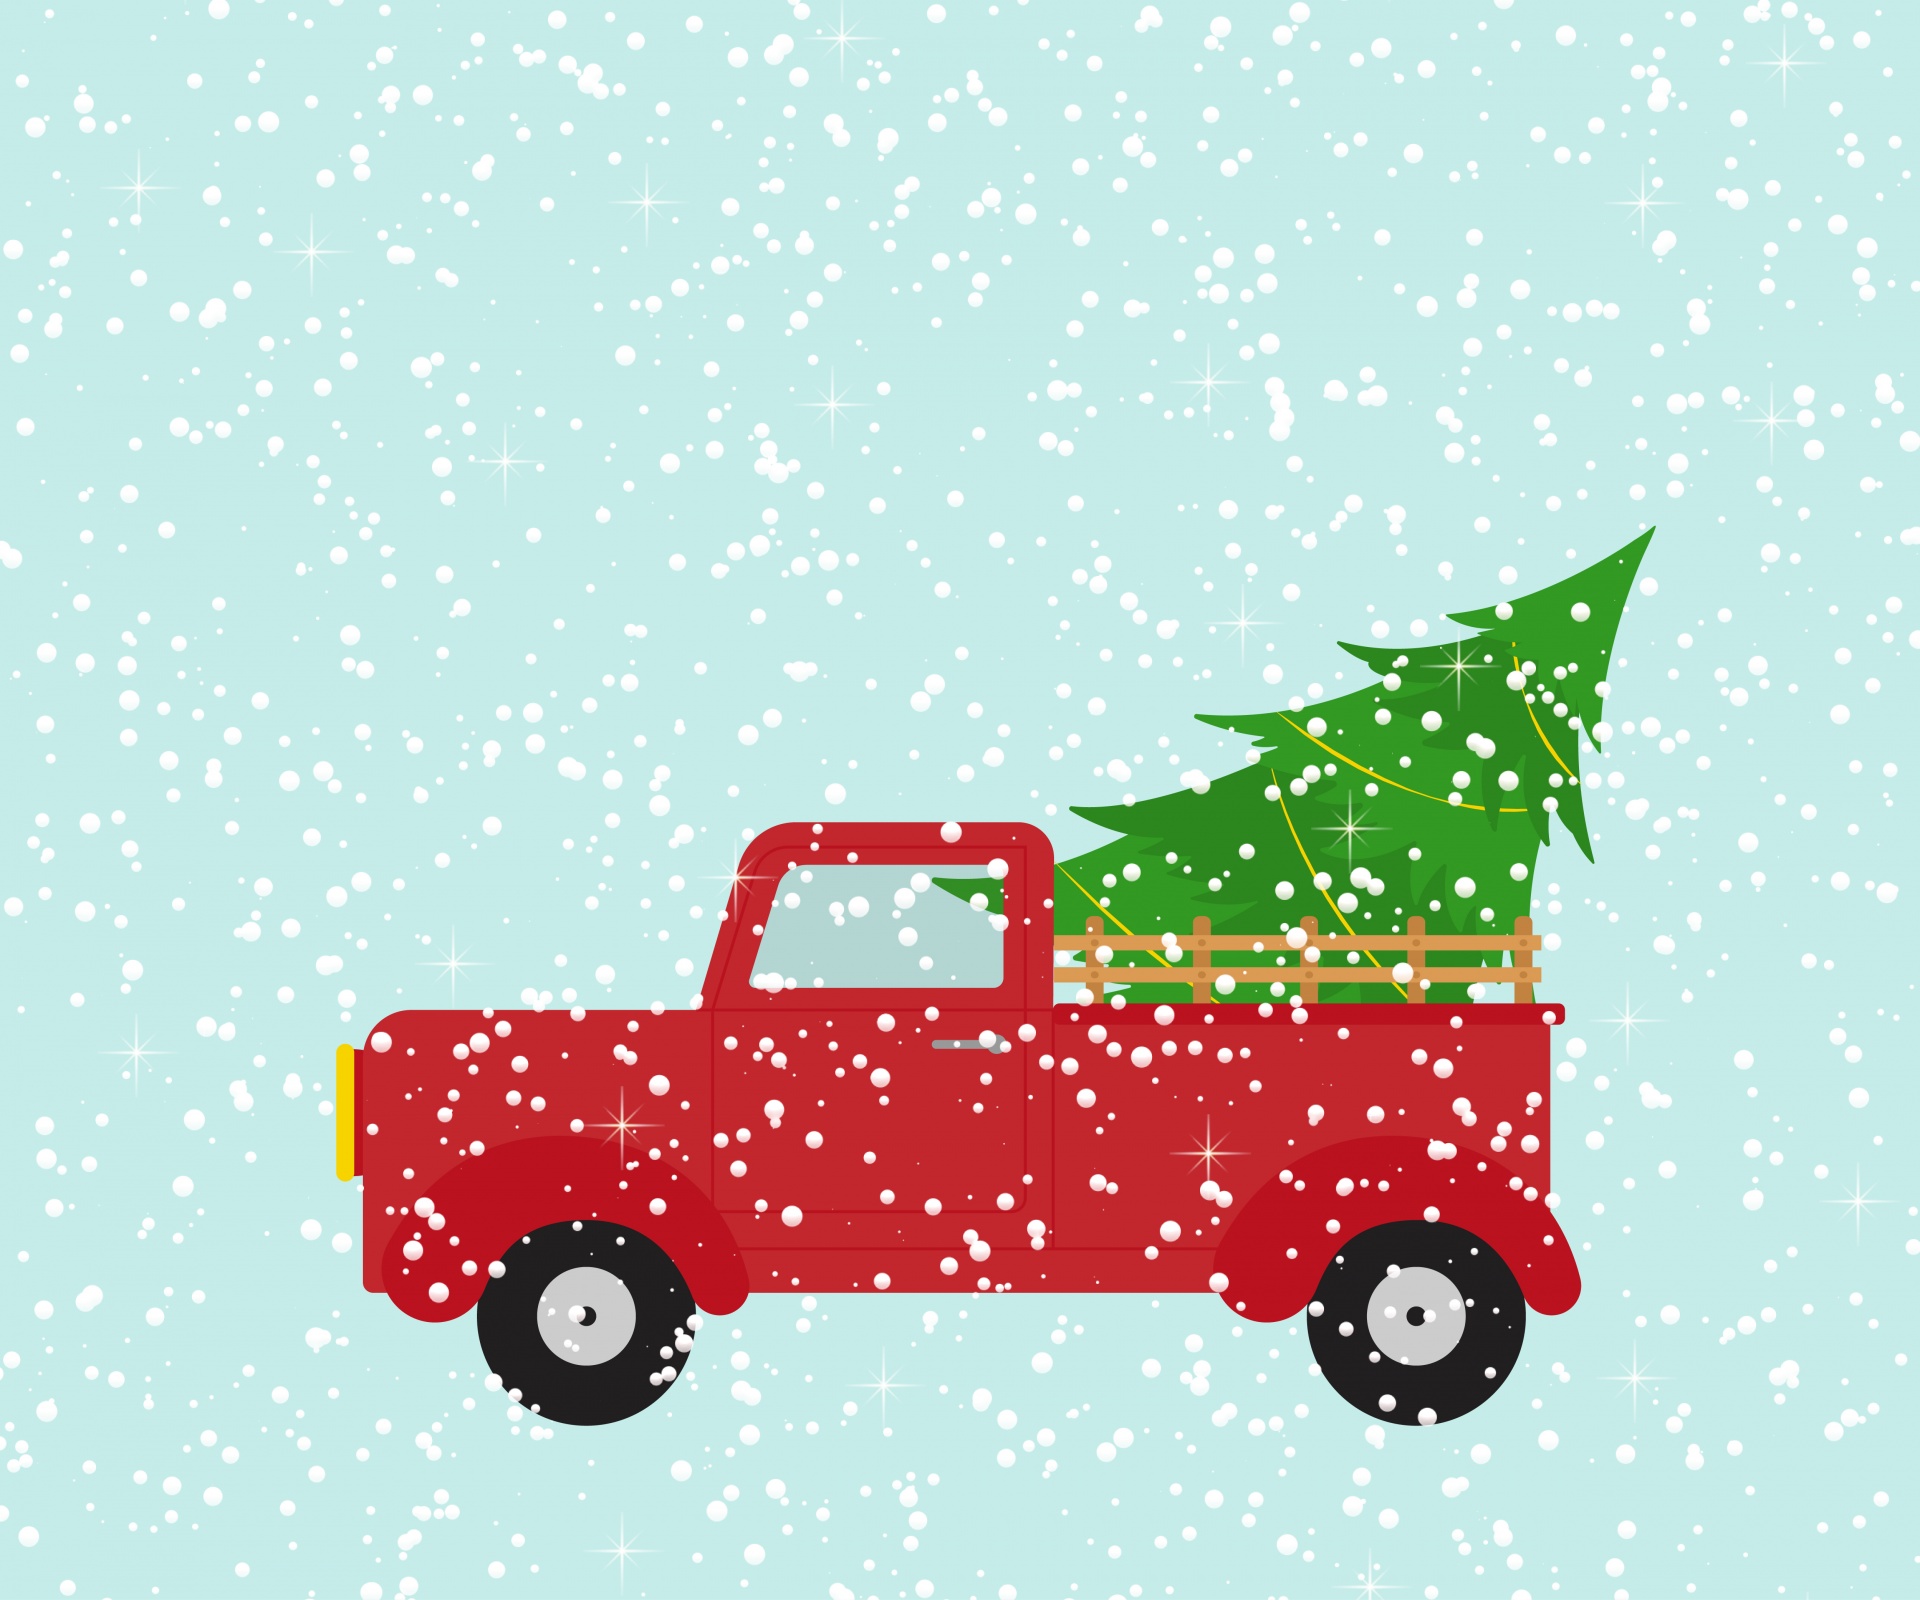 Retro vintage red pickup truck with christmas tree and snow